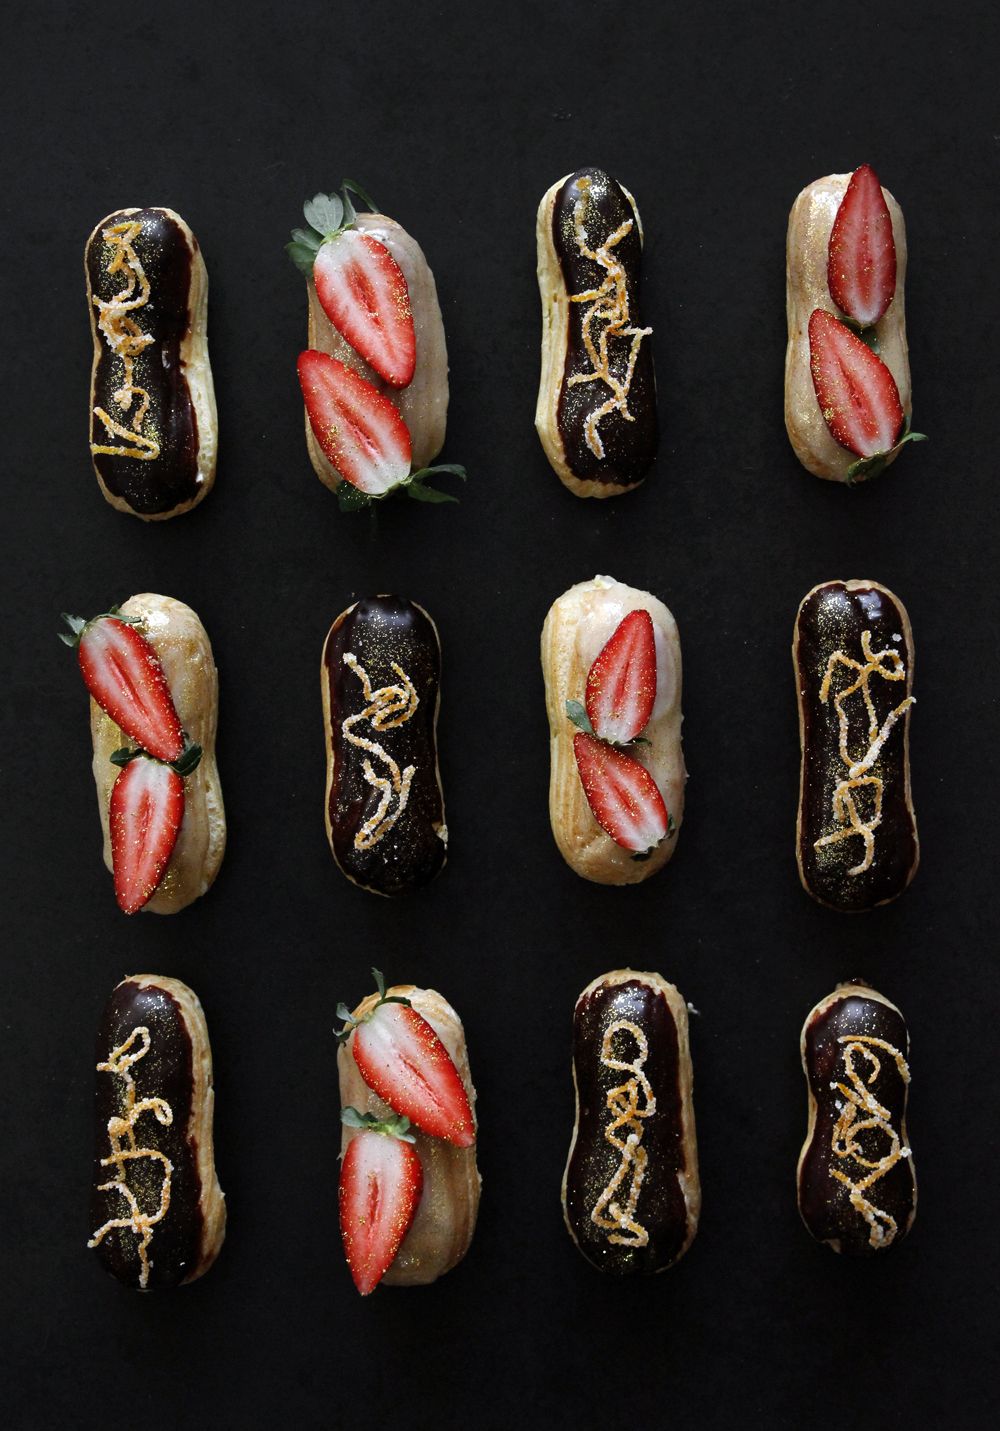 Strawberry and Champagne Eclairs